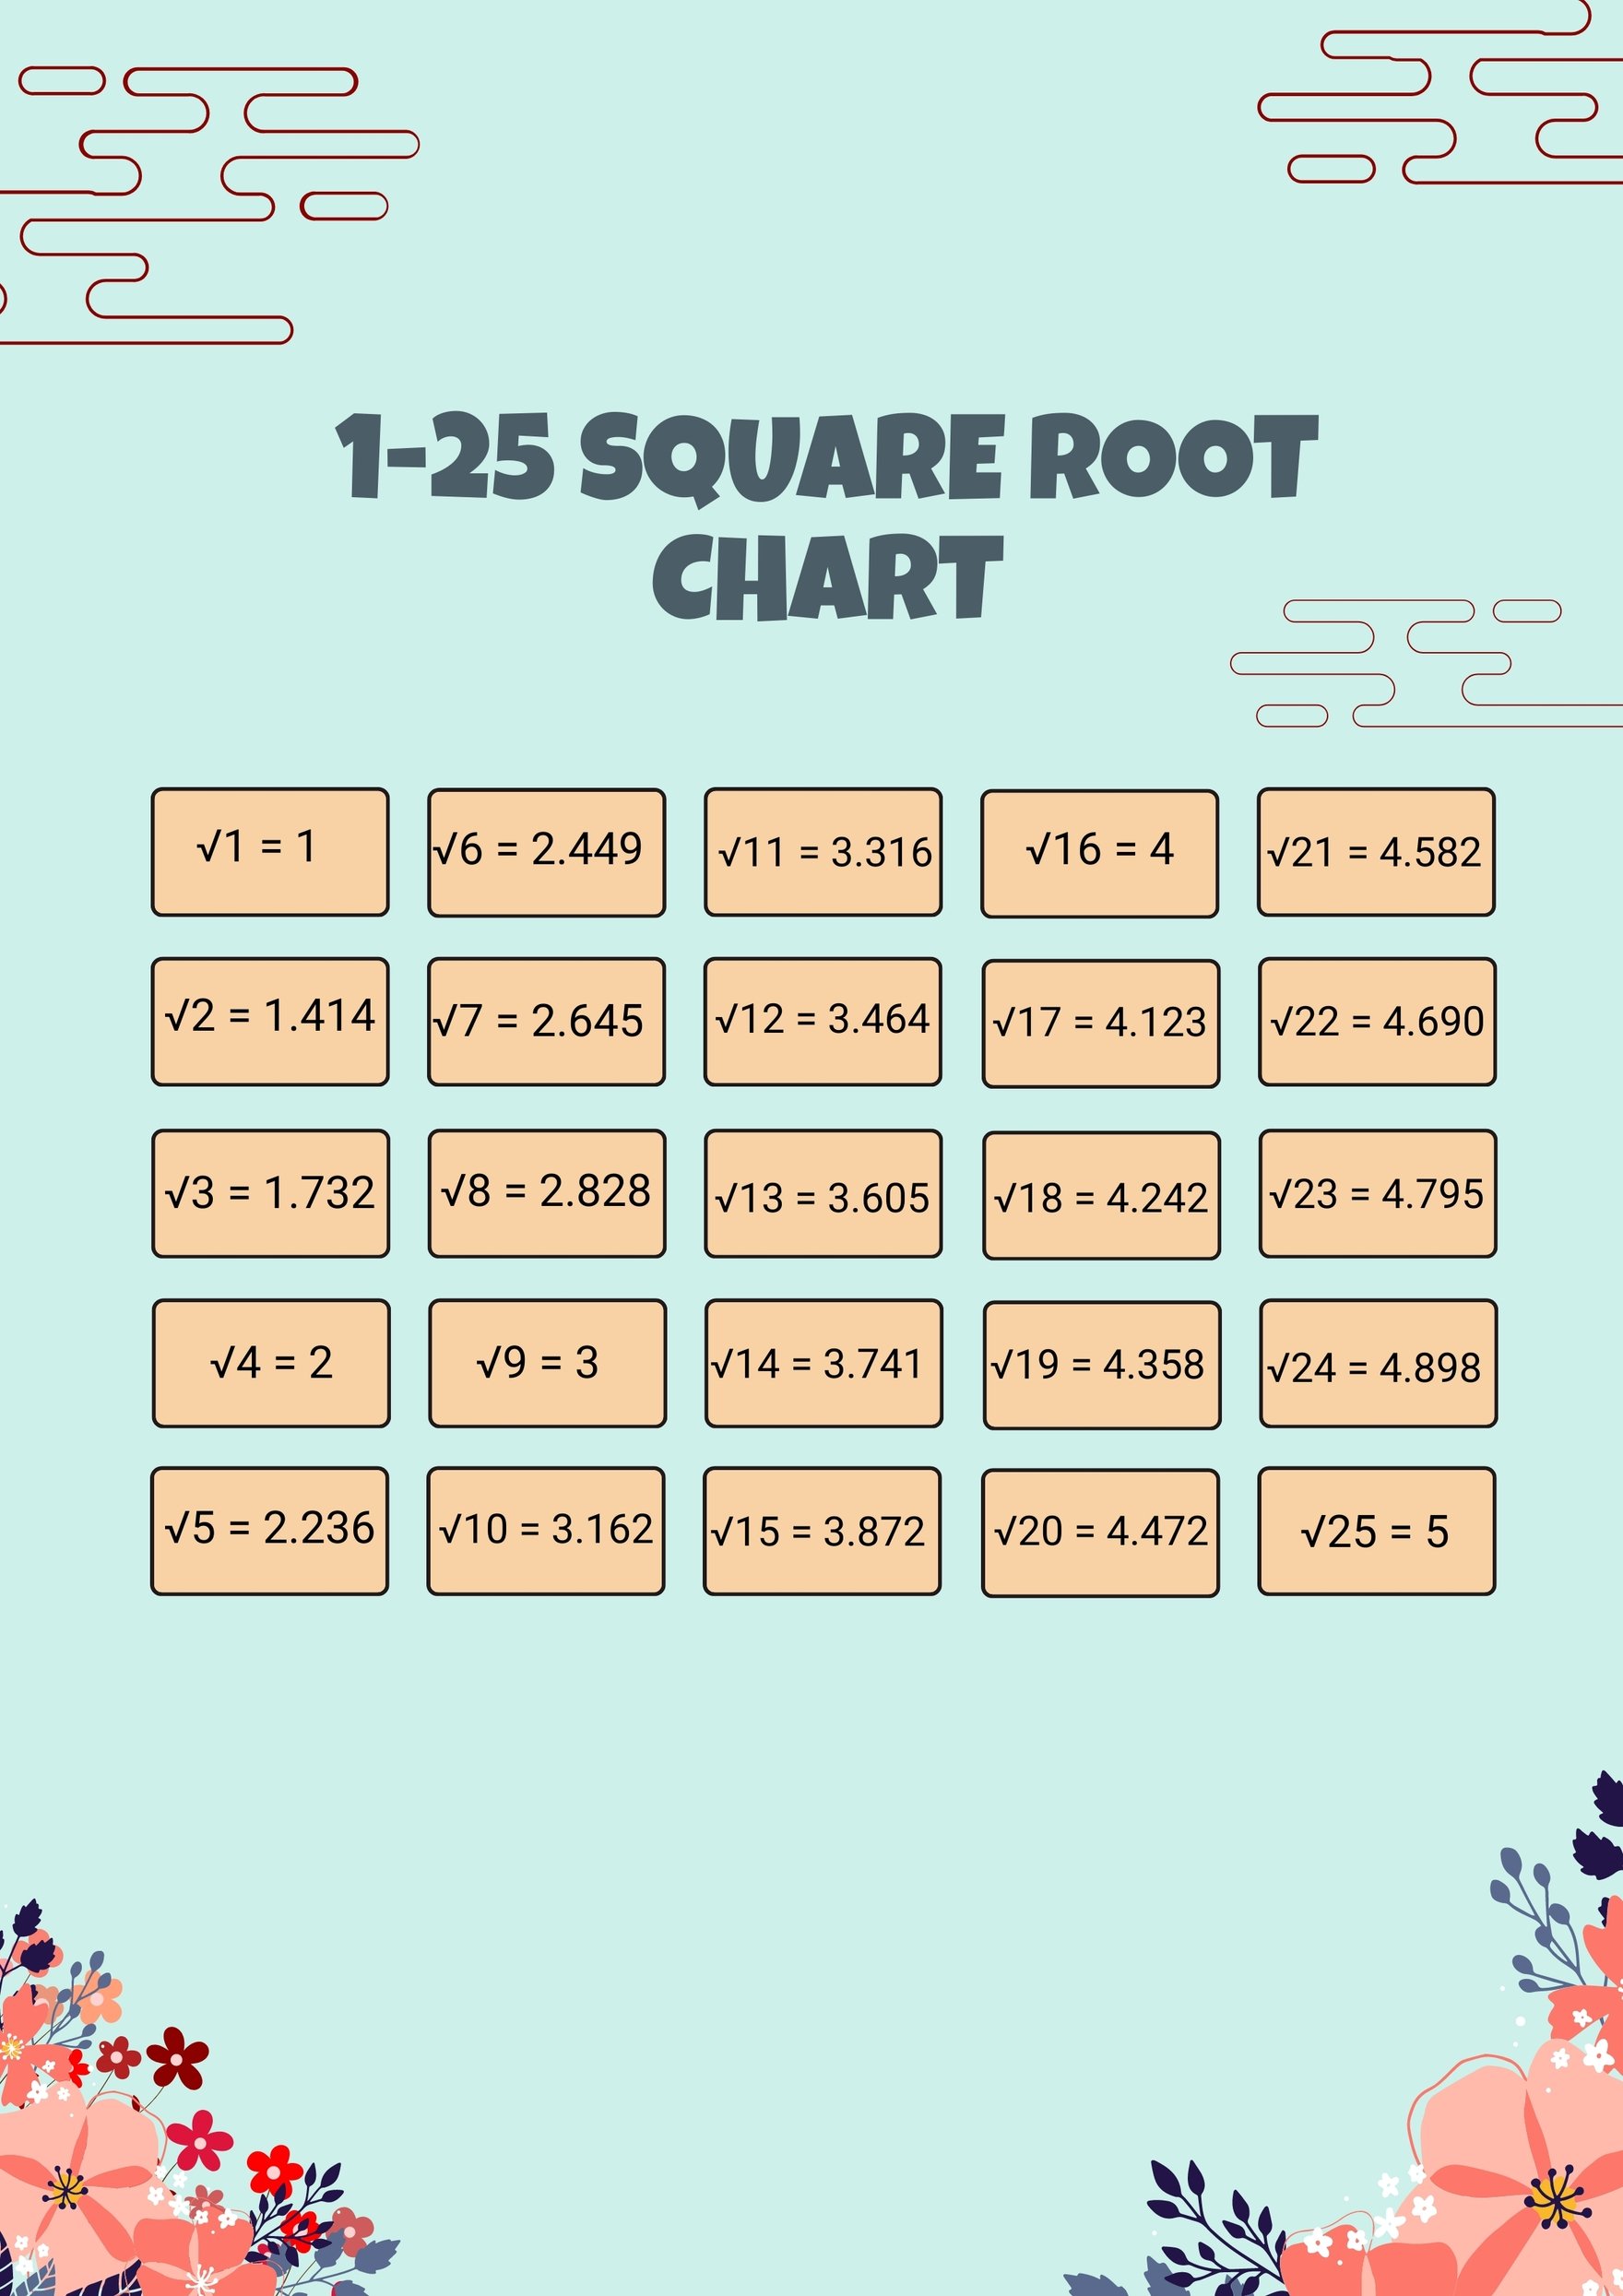 1-25 Square Root Chart